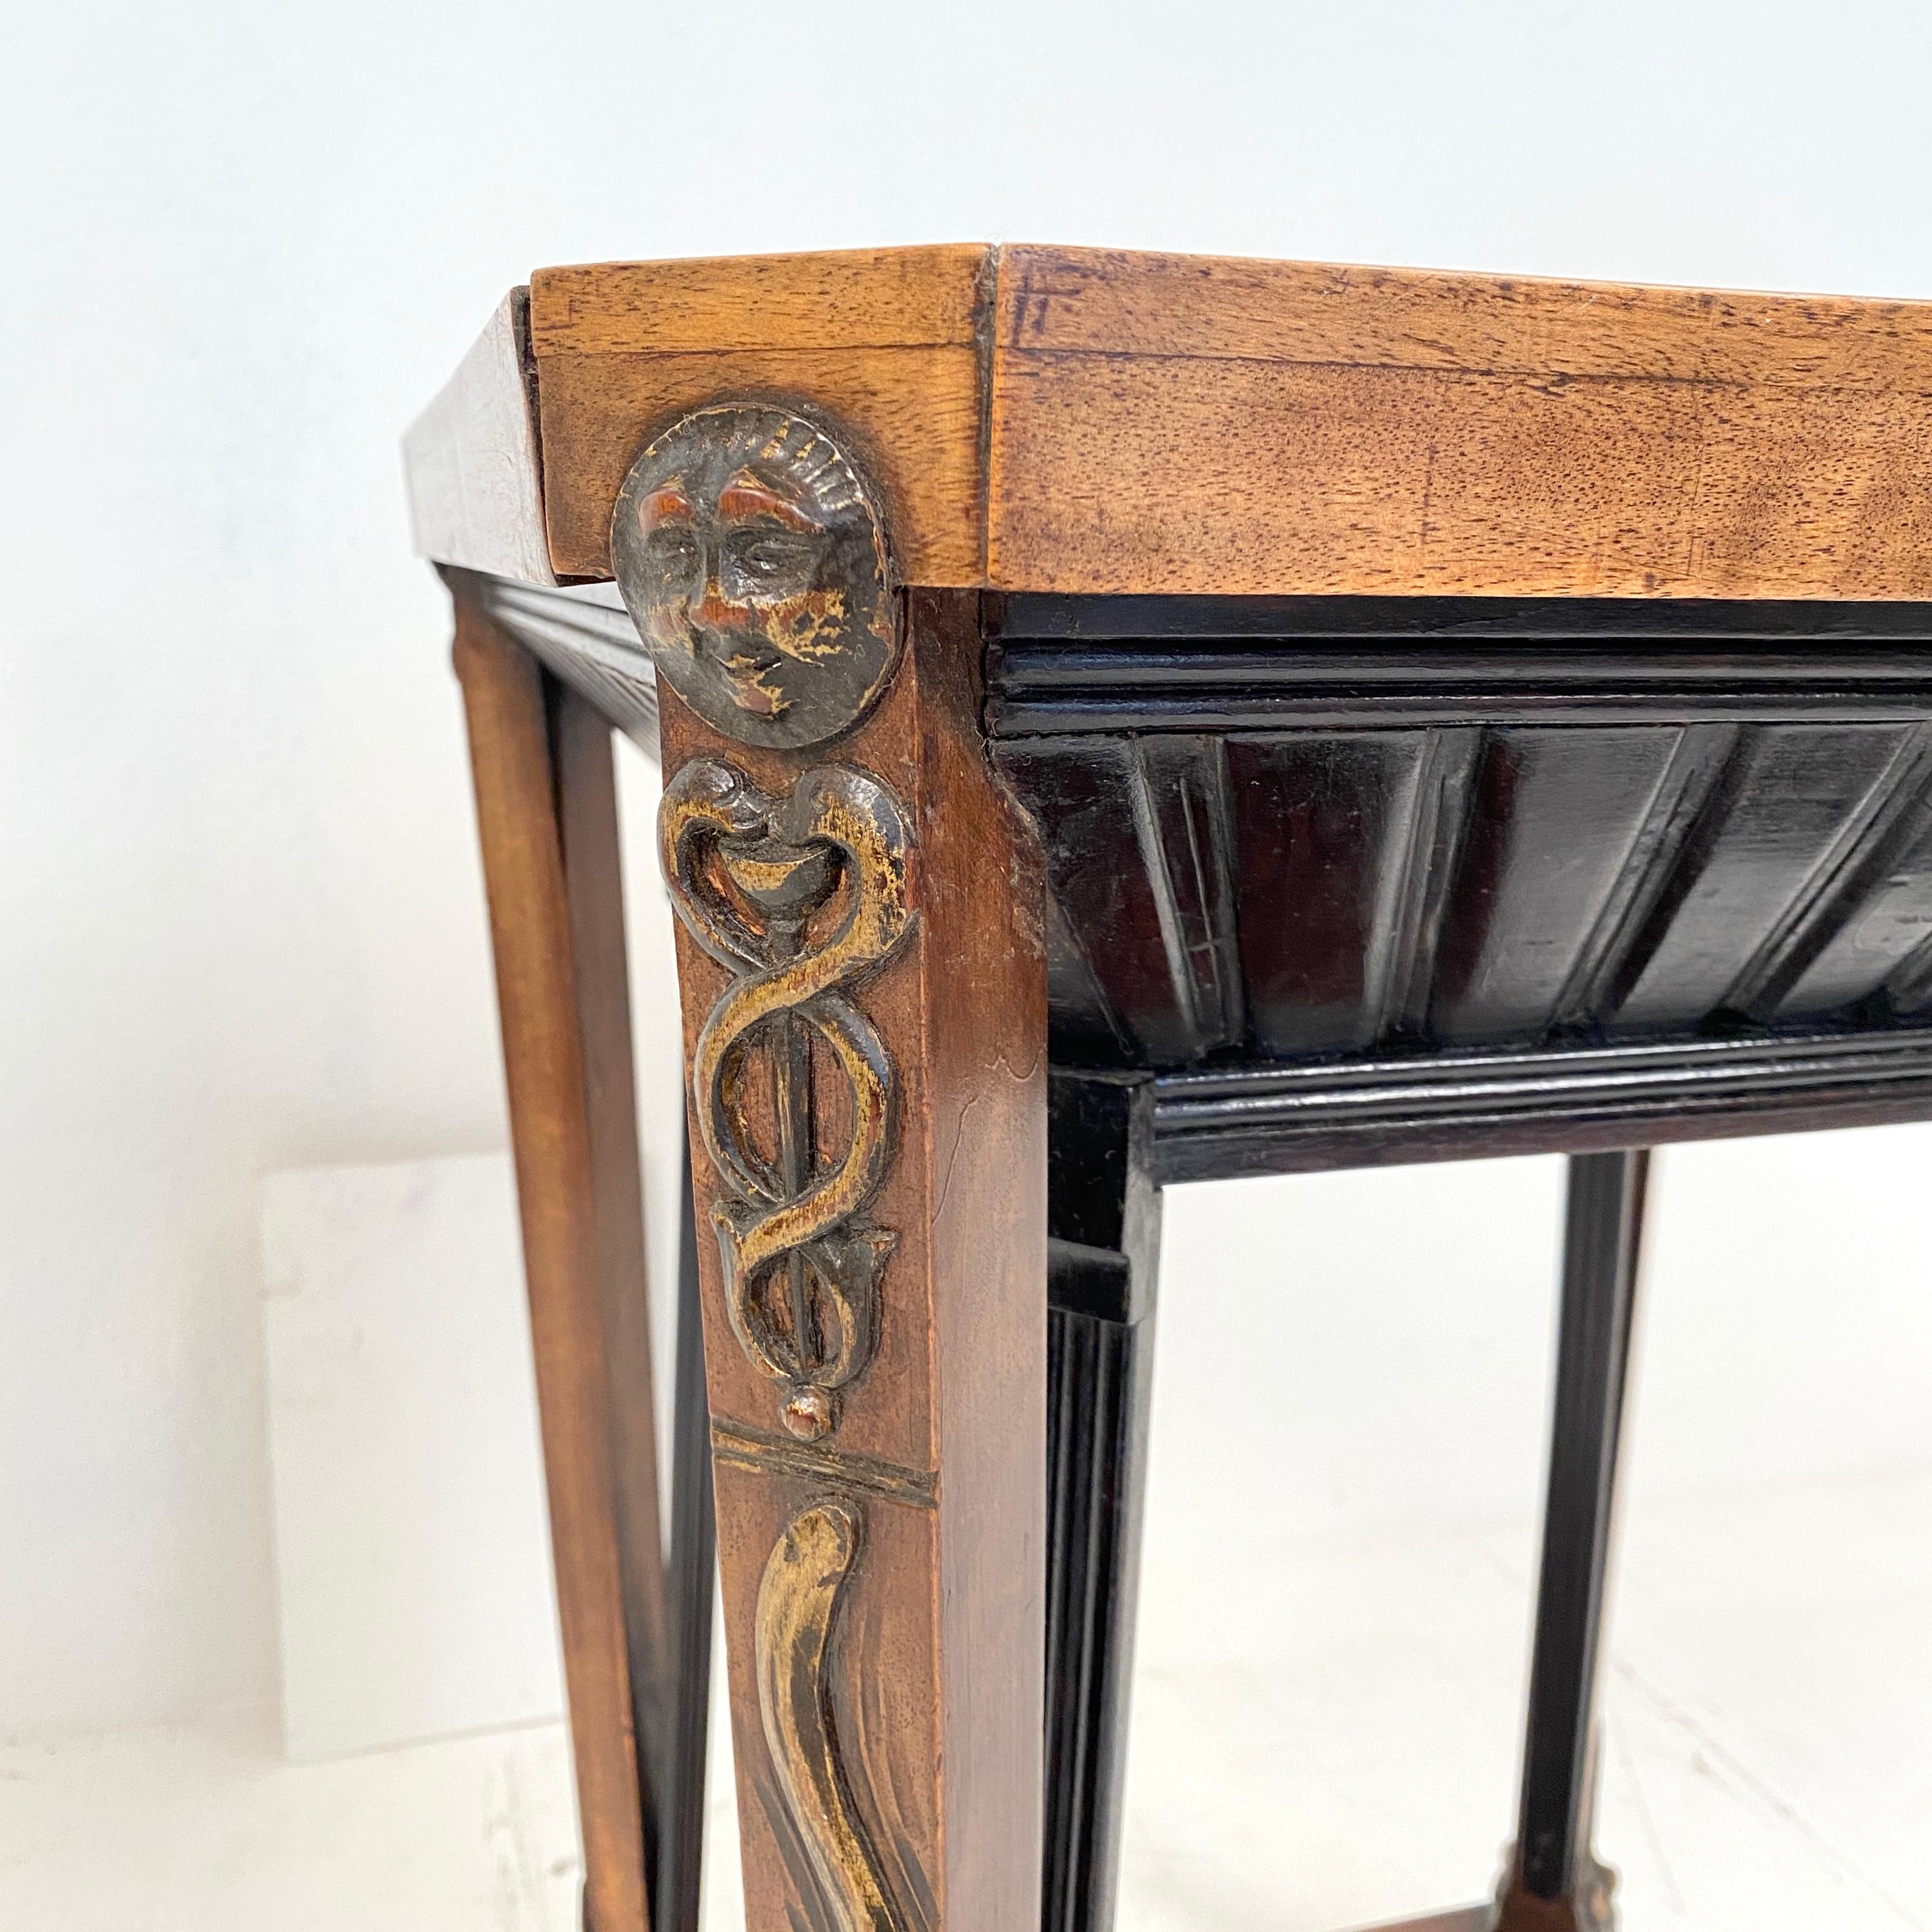 Early 20th Century French Art Deco Chemist Side Table with Mosaic Top and Carved Base, around 1920